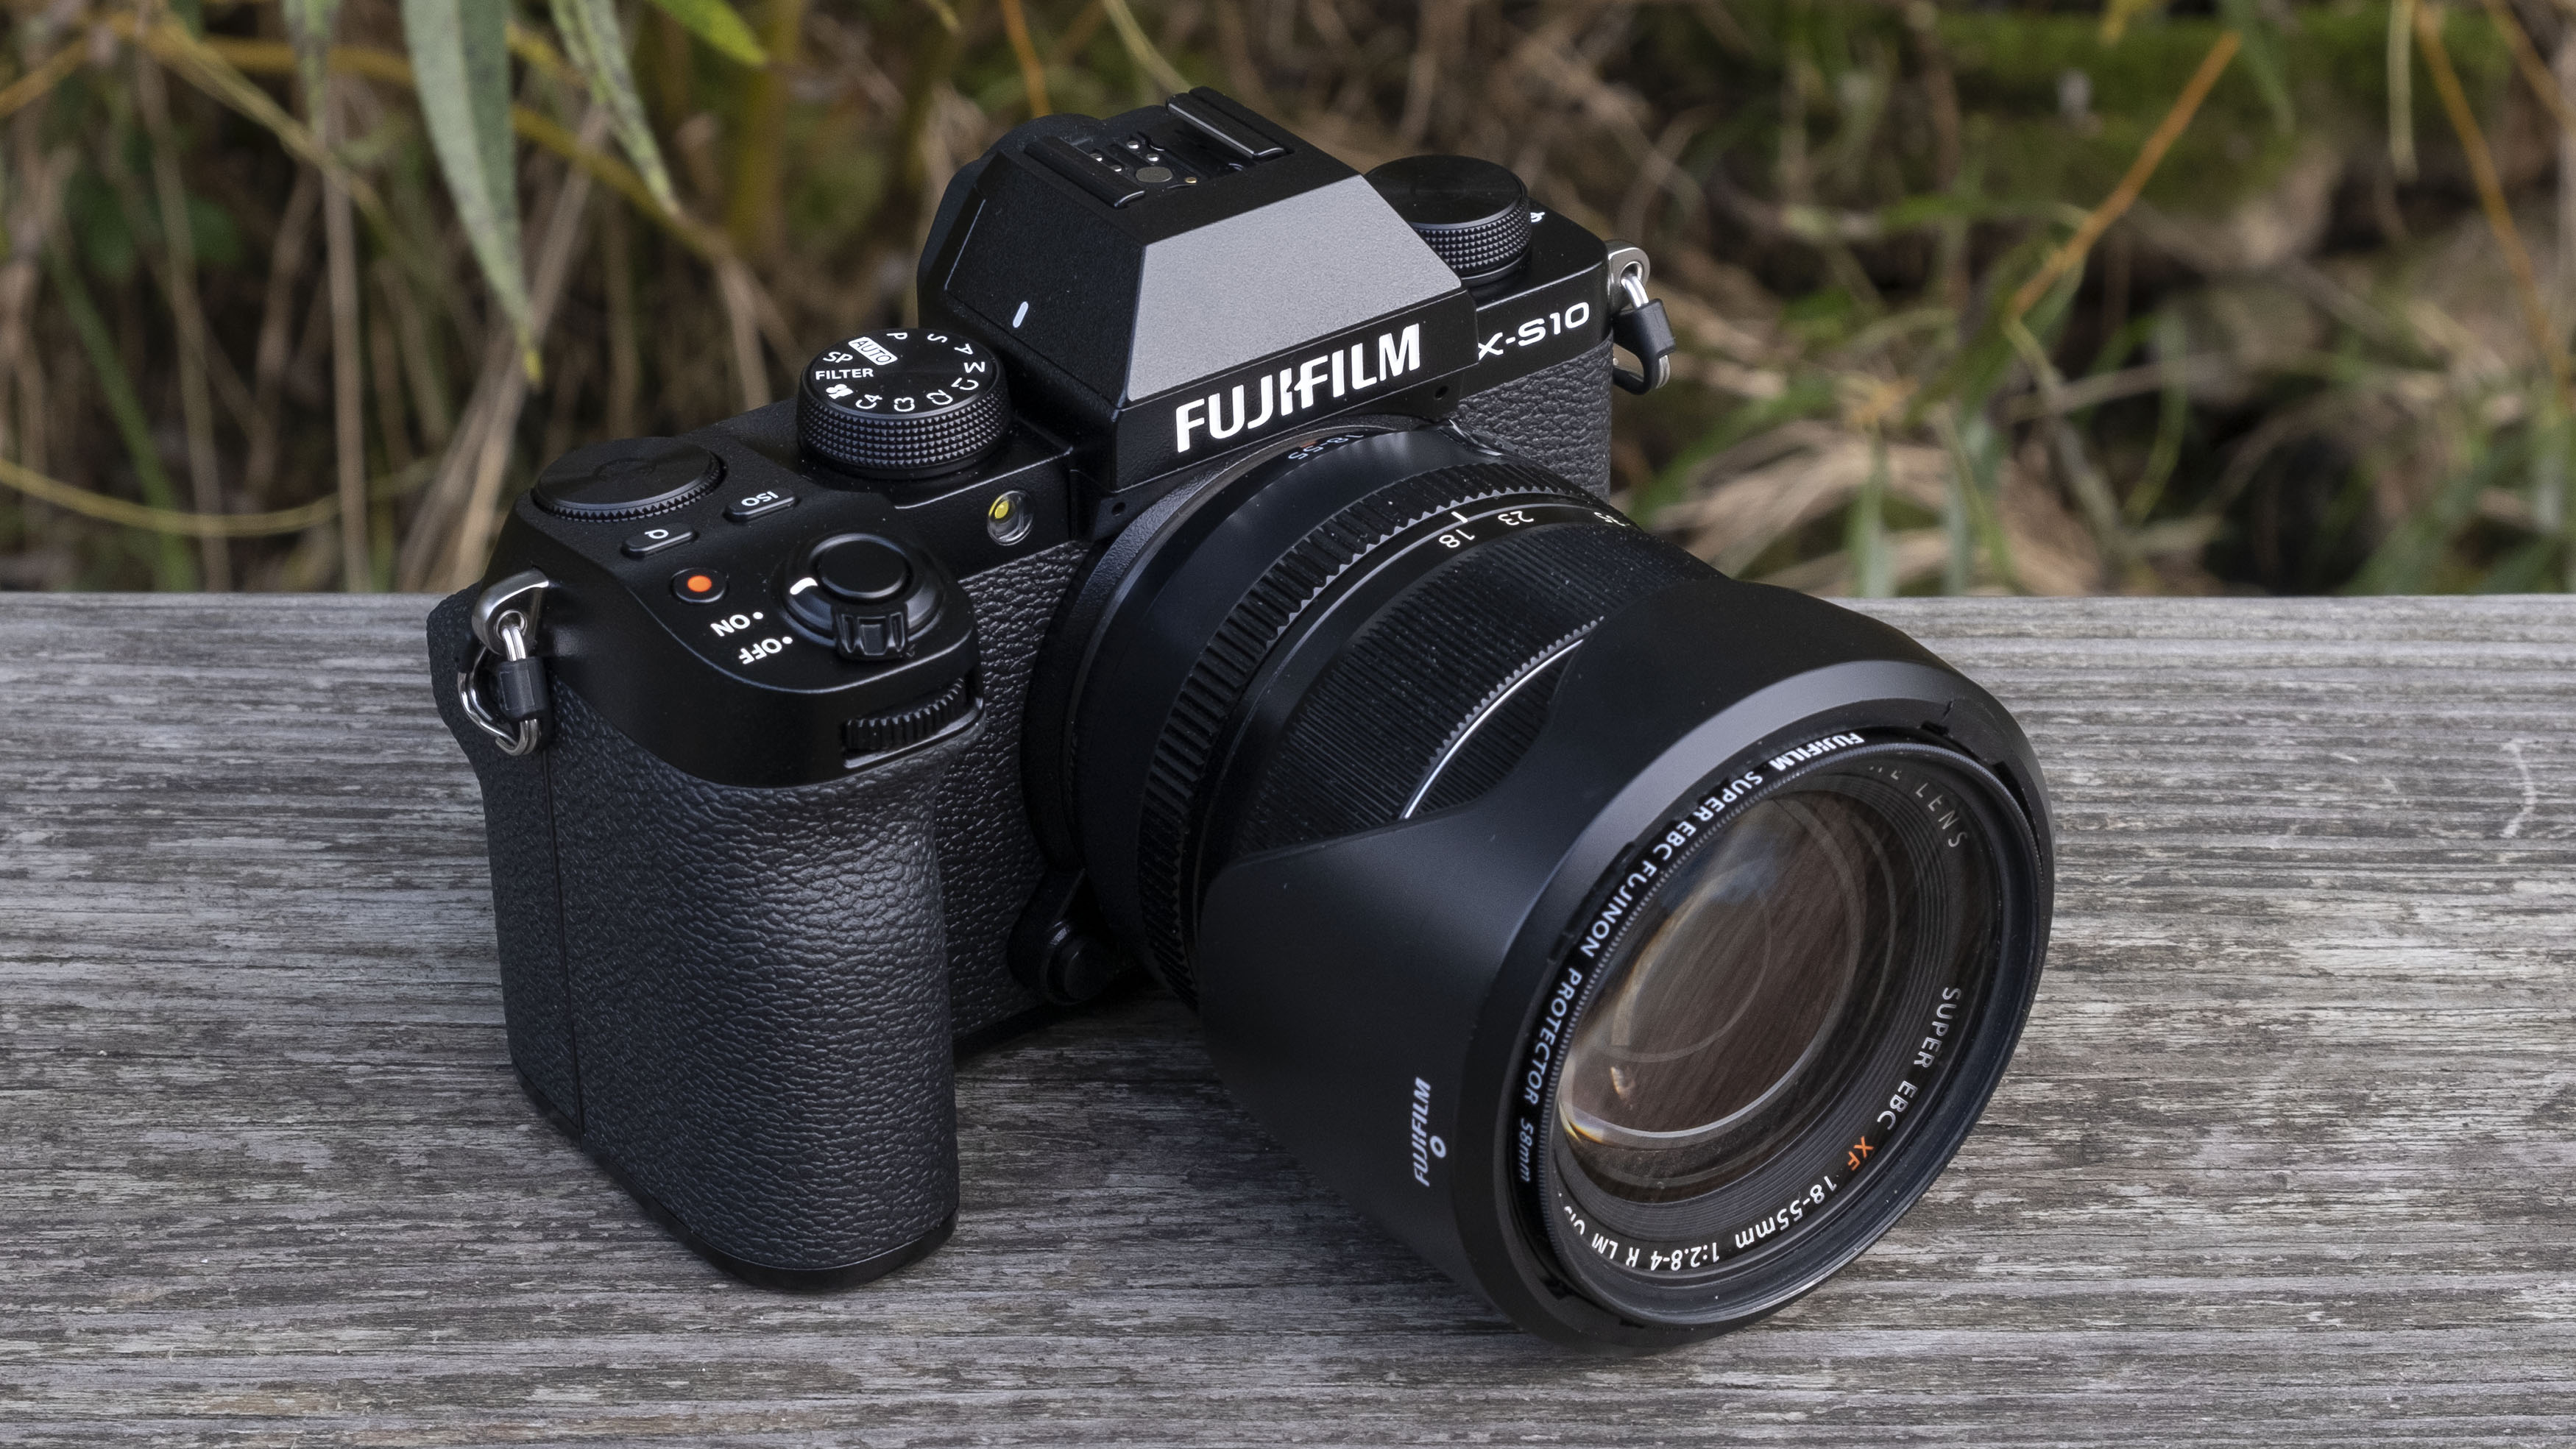 The Fujifilm X-S10 on a wall with the 18-55mm kit lens